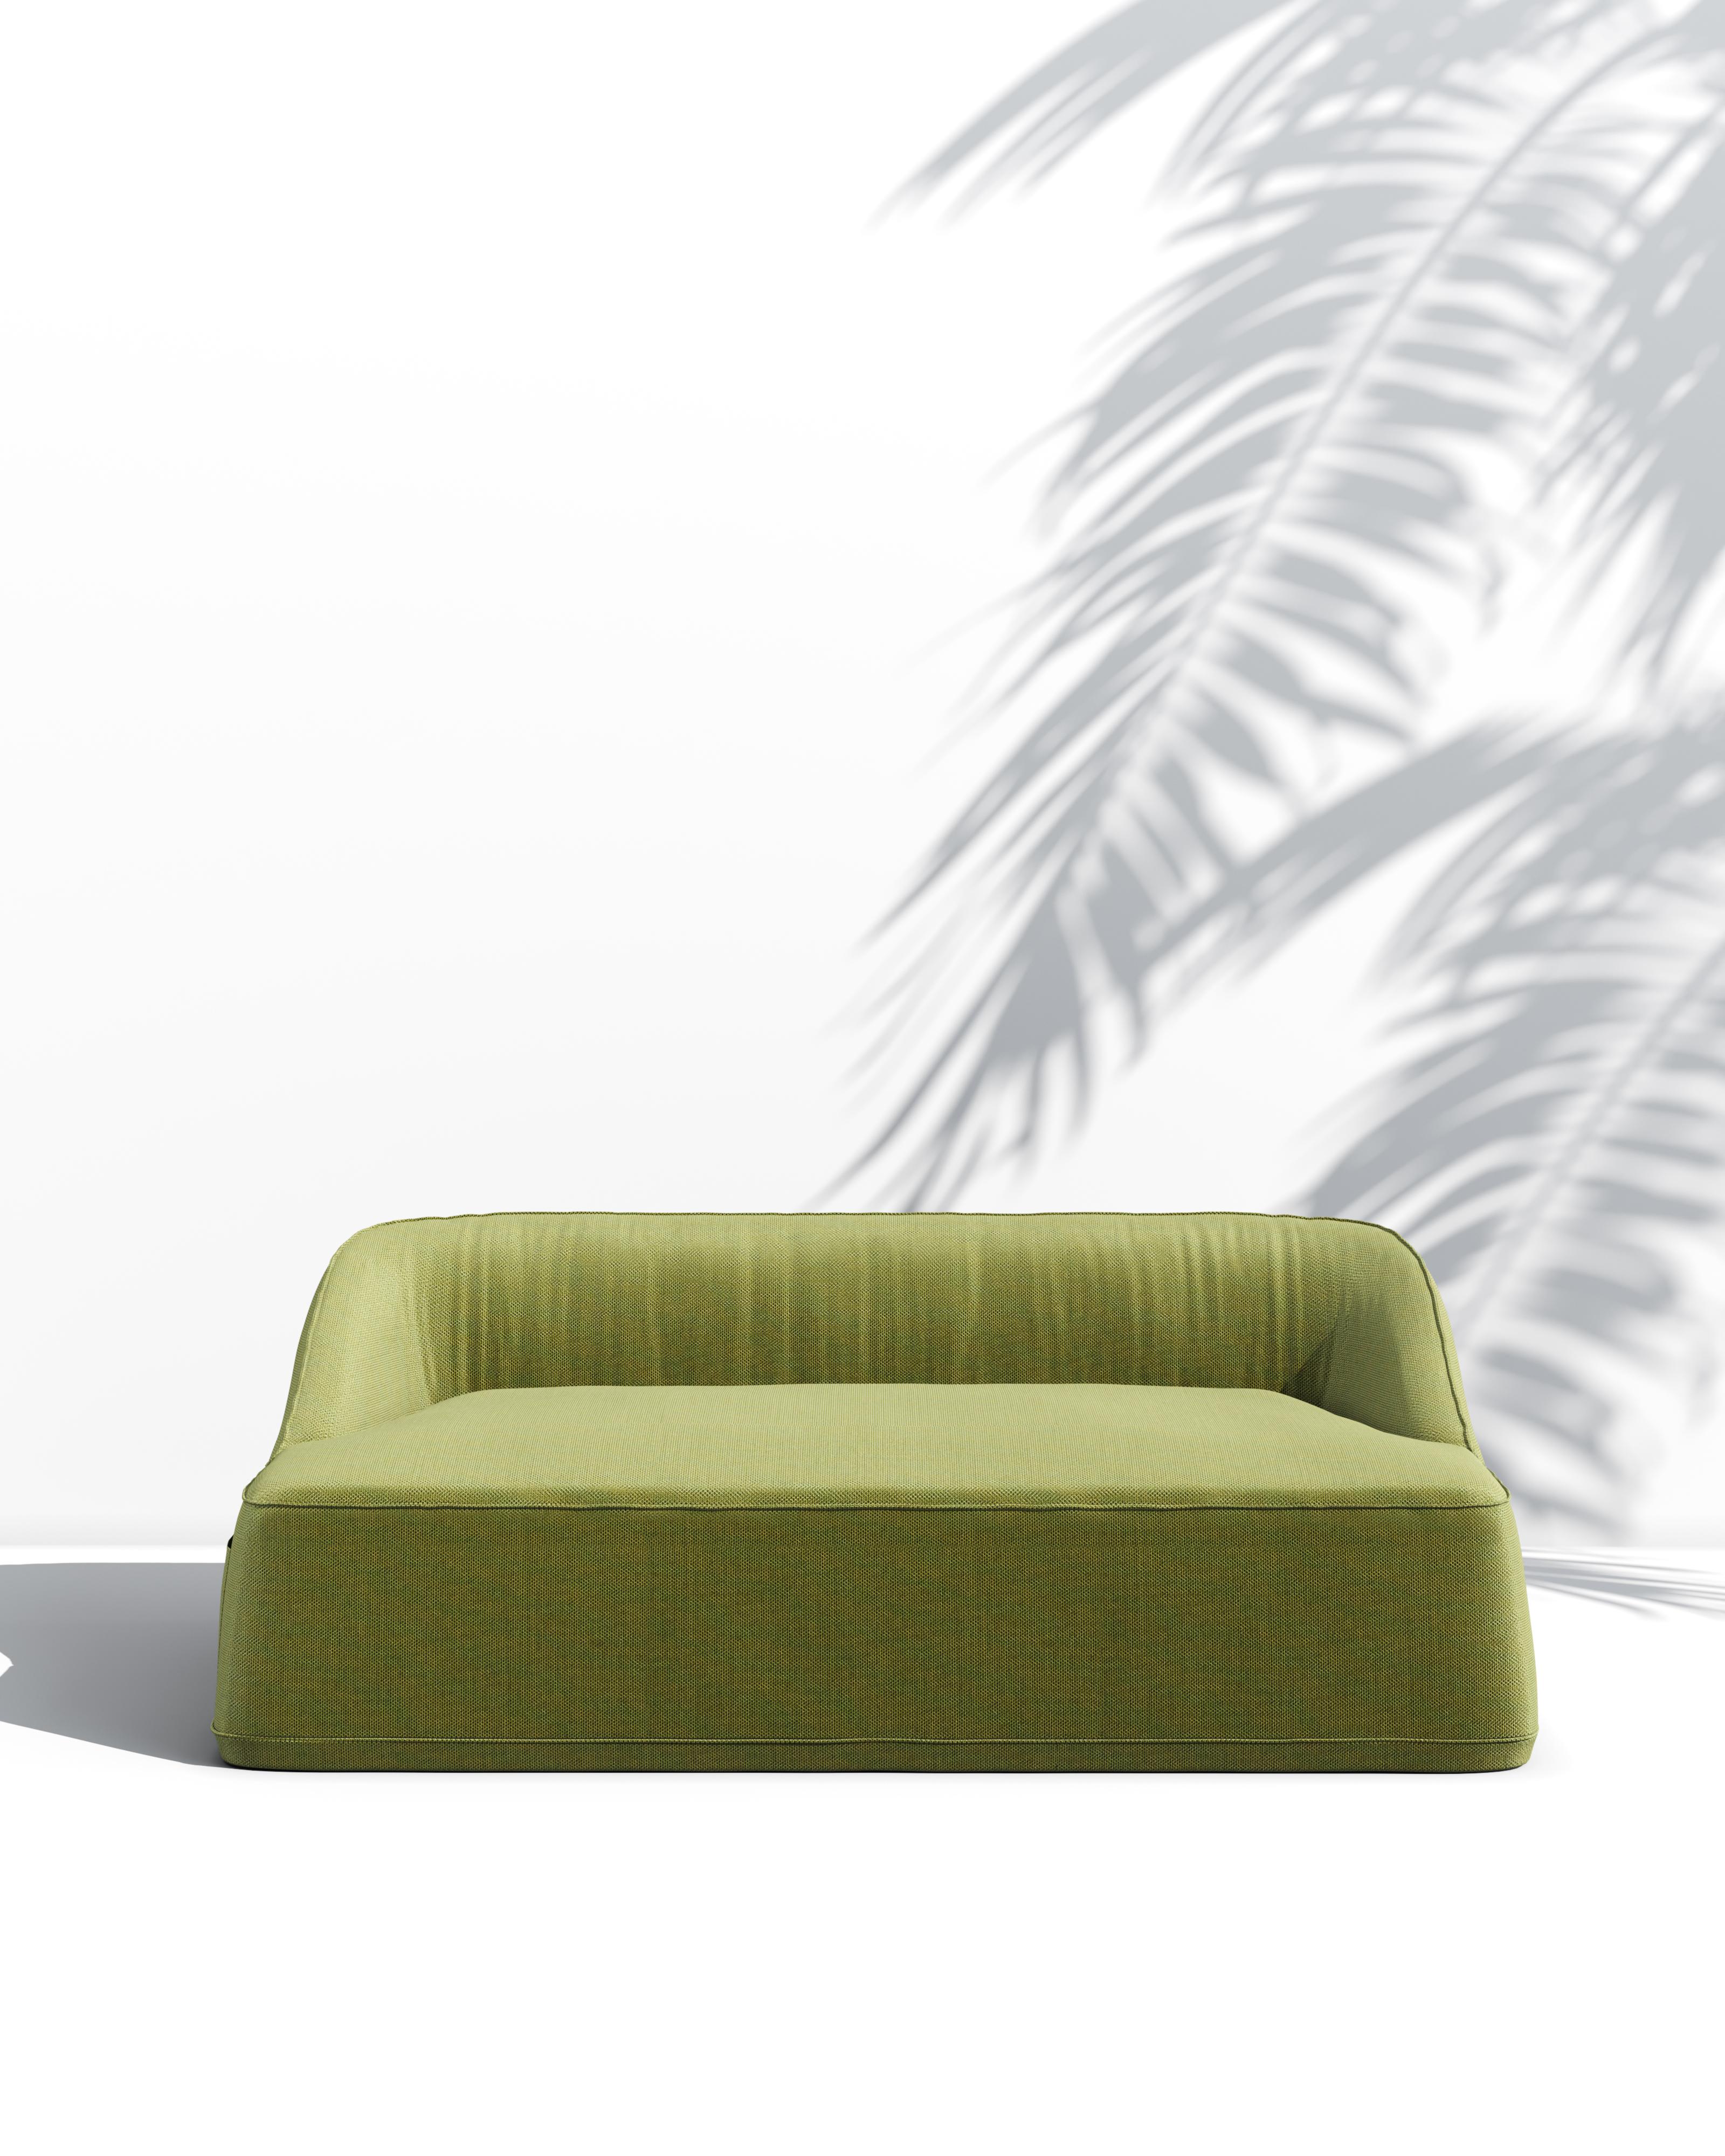 Leather Green Outdoor Sofa with Upholstery in Weather-Resistant Sunbrella Fabric For Sale